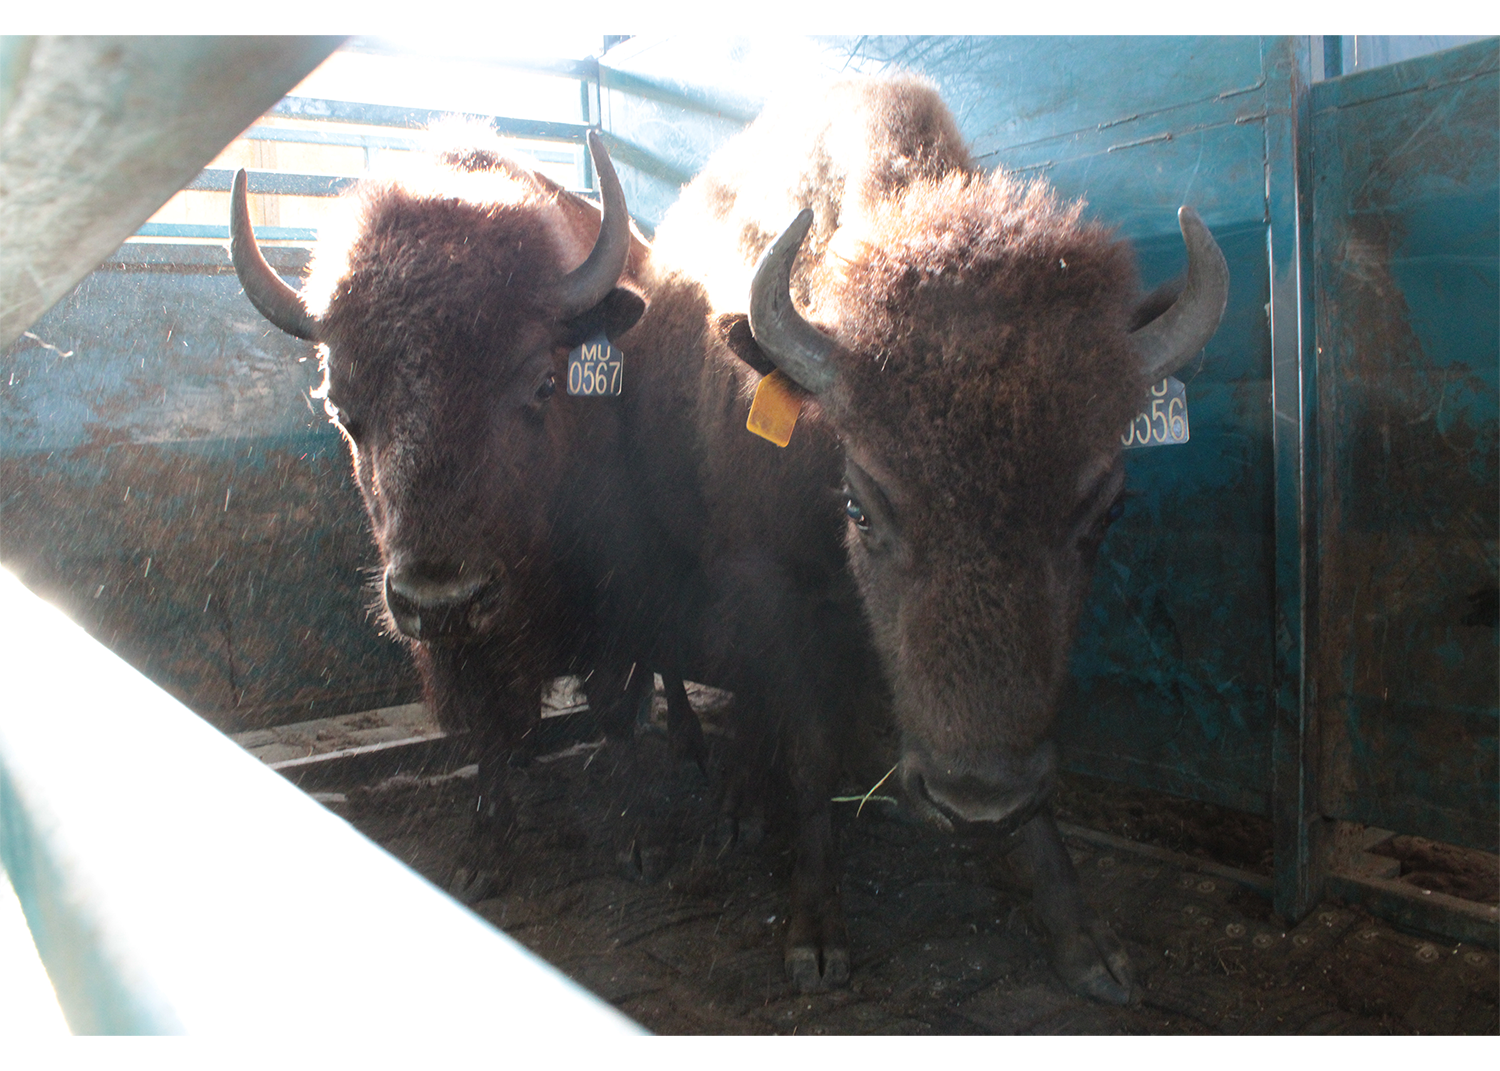 Two bison stand in a blue holding pen, looking towards the camera.